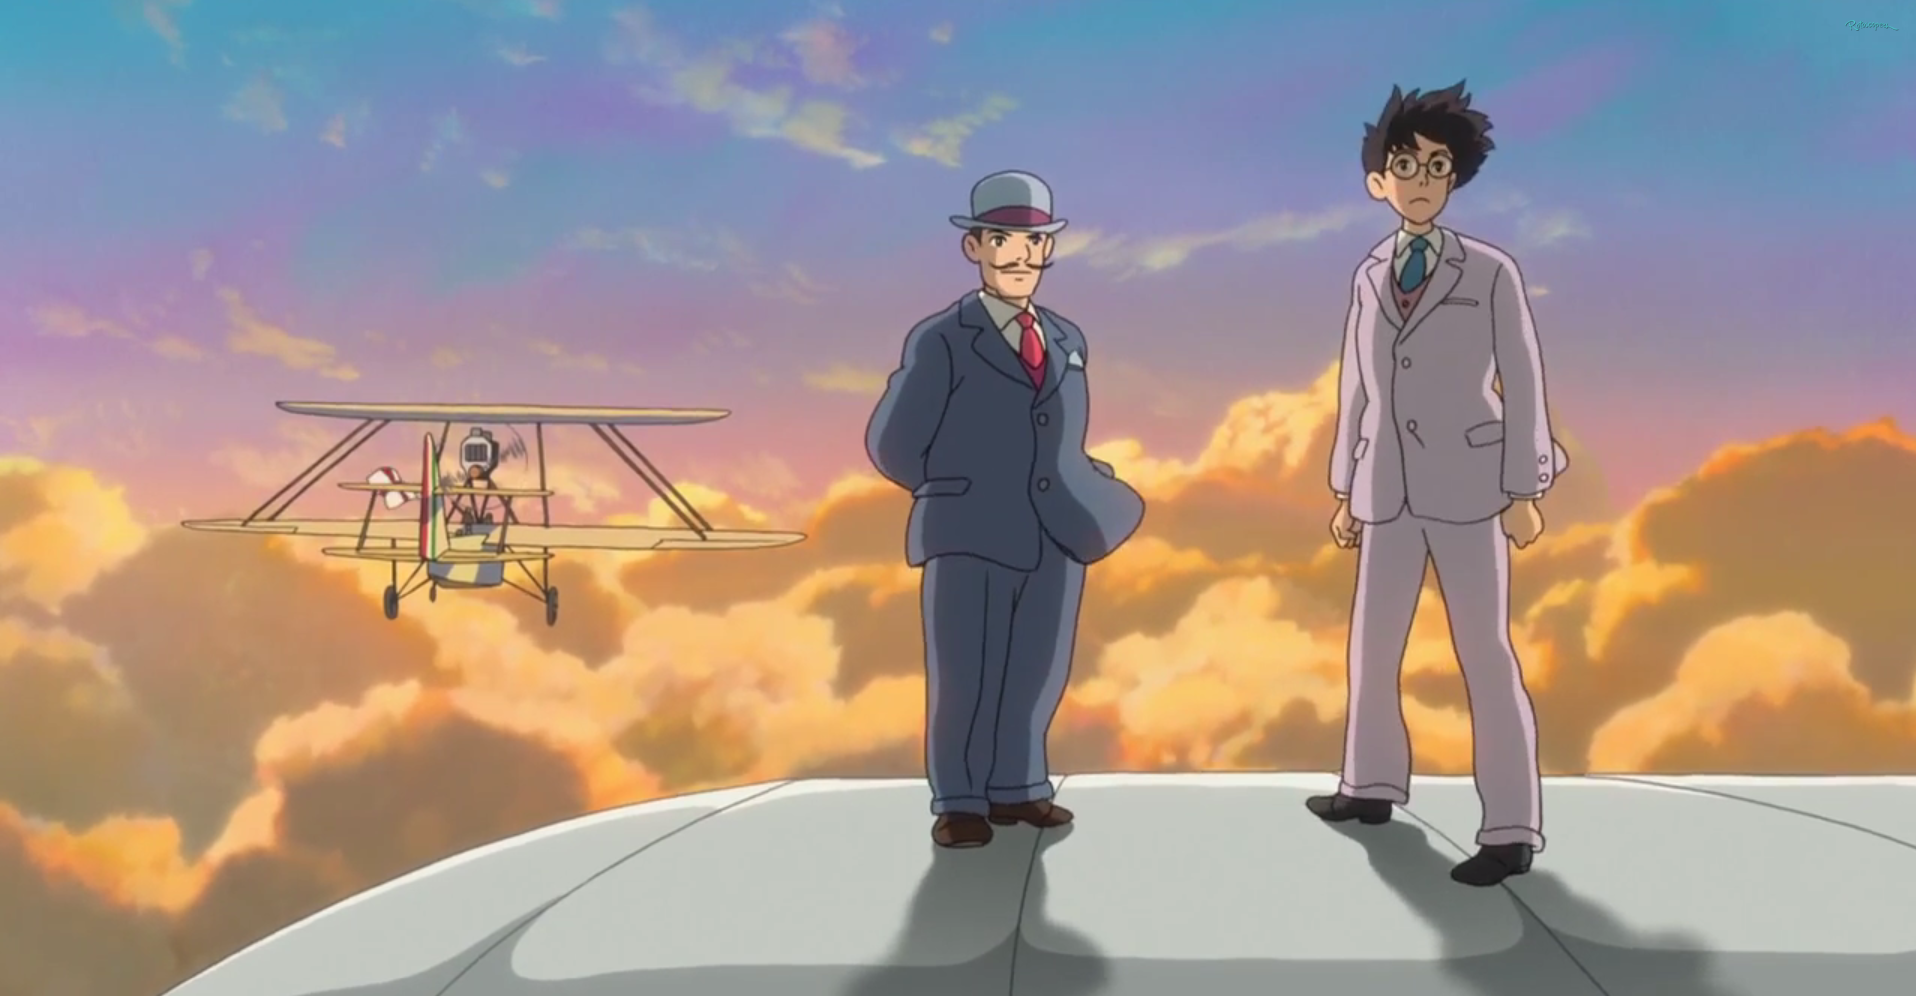 Creating Planes Clip from 'The Wind Rises' Shows Jiro Flying on Airplane Wing